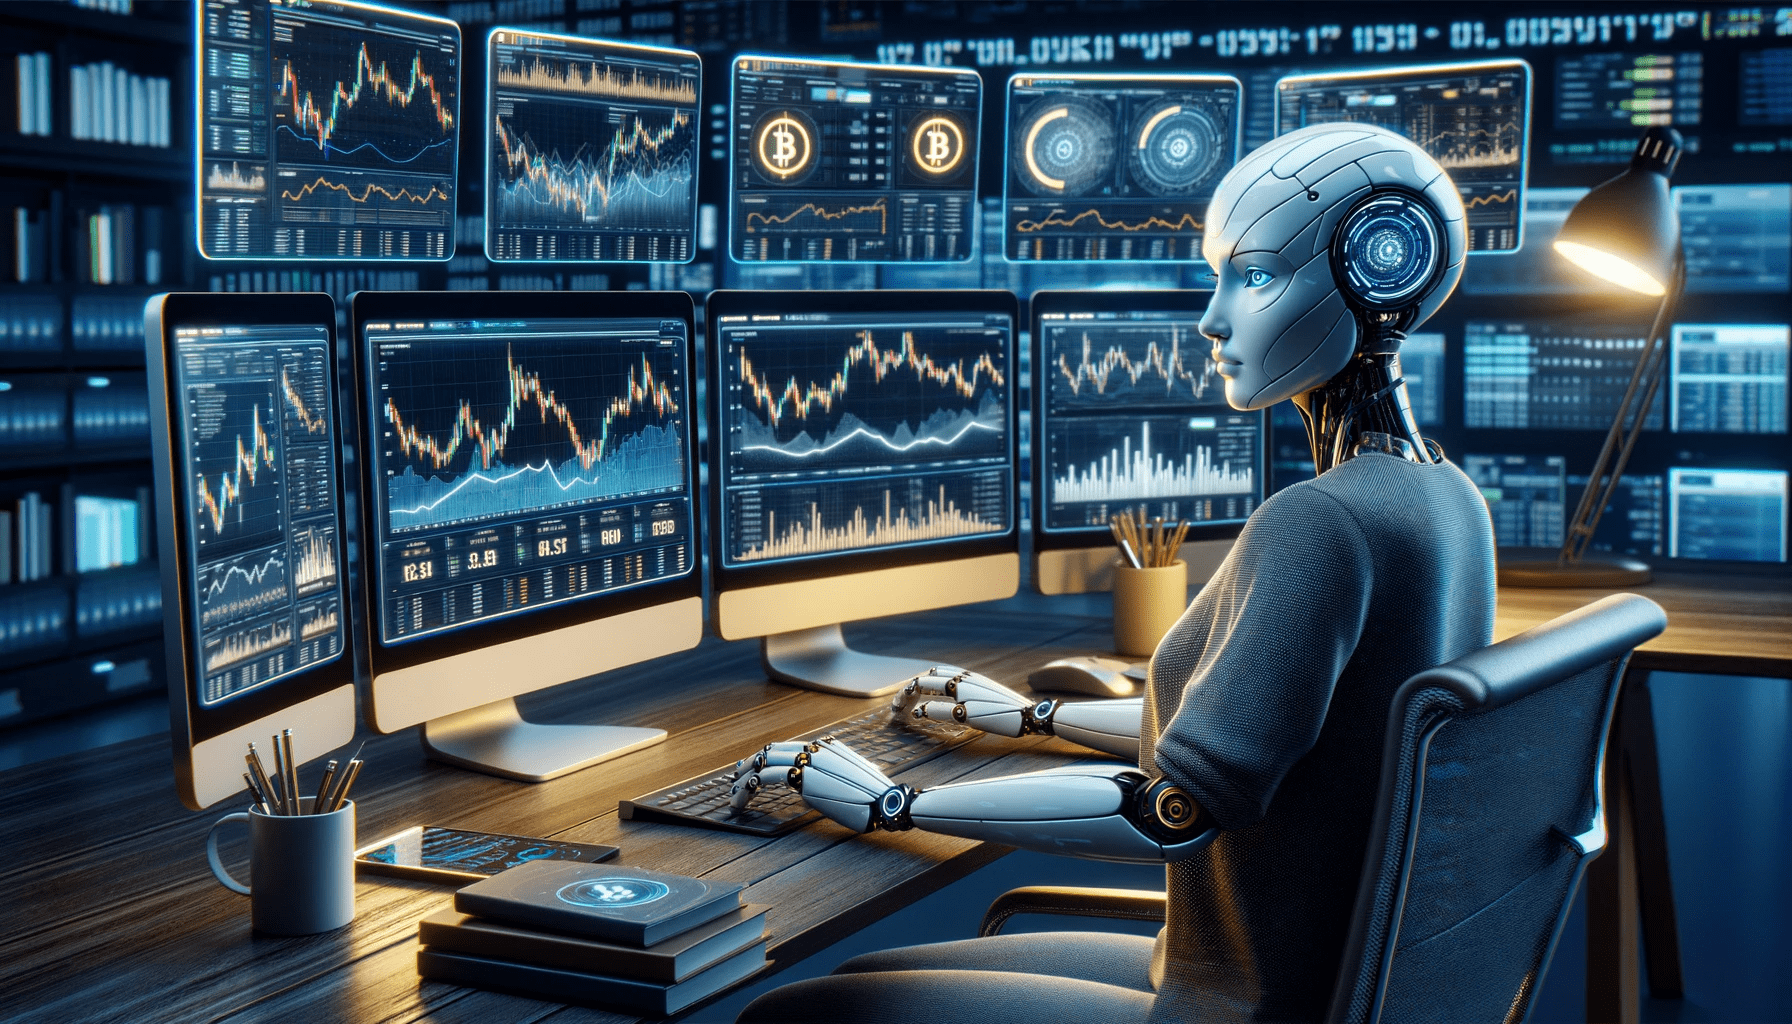 AI in human form working on crypto price predictions.